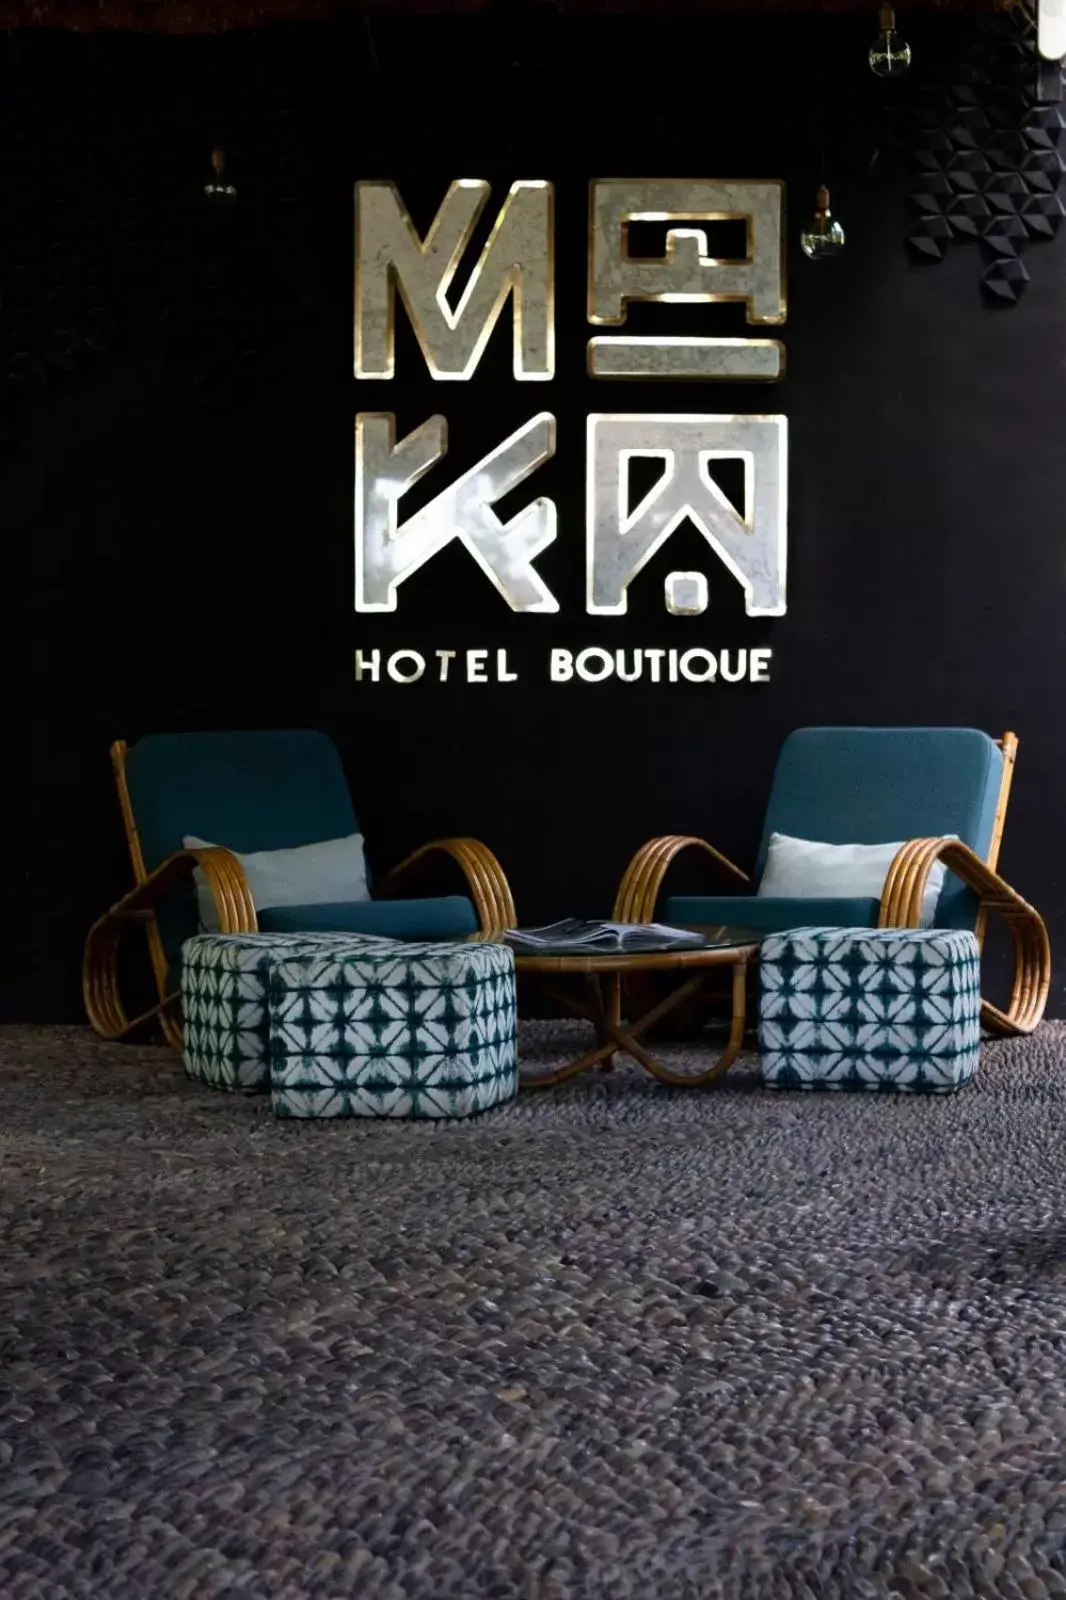 Property building in Maka Hotel Boutique